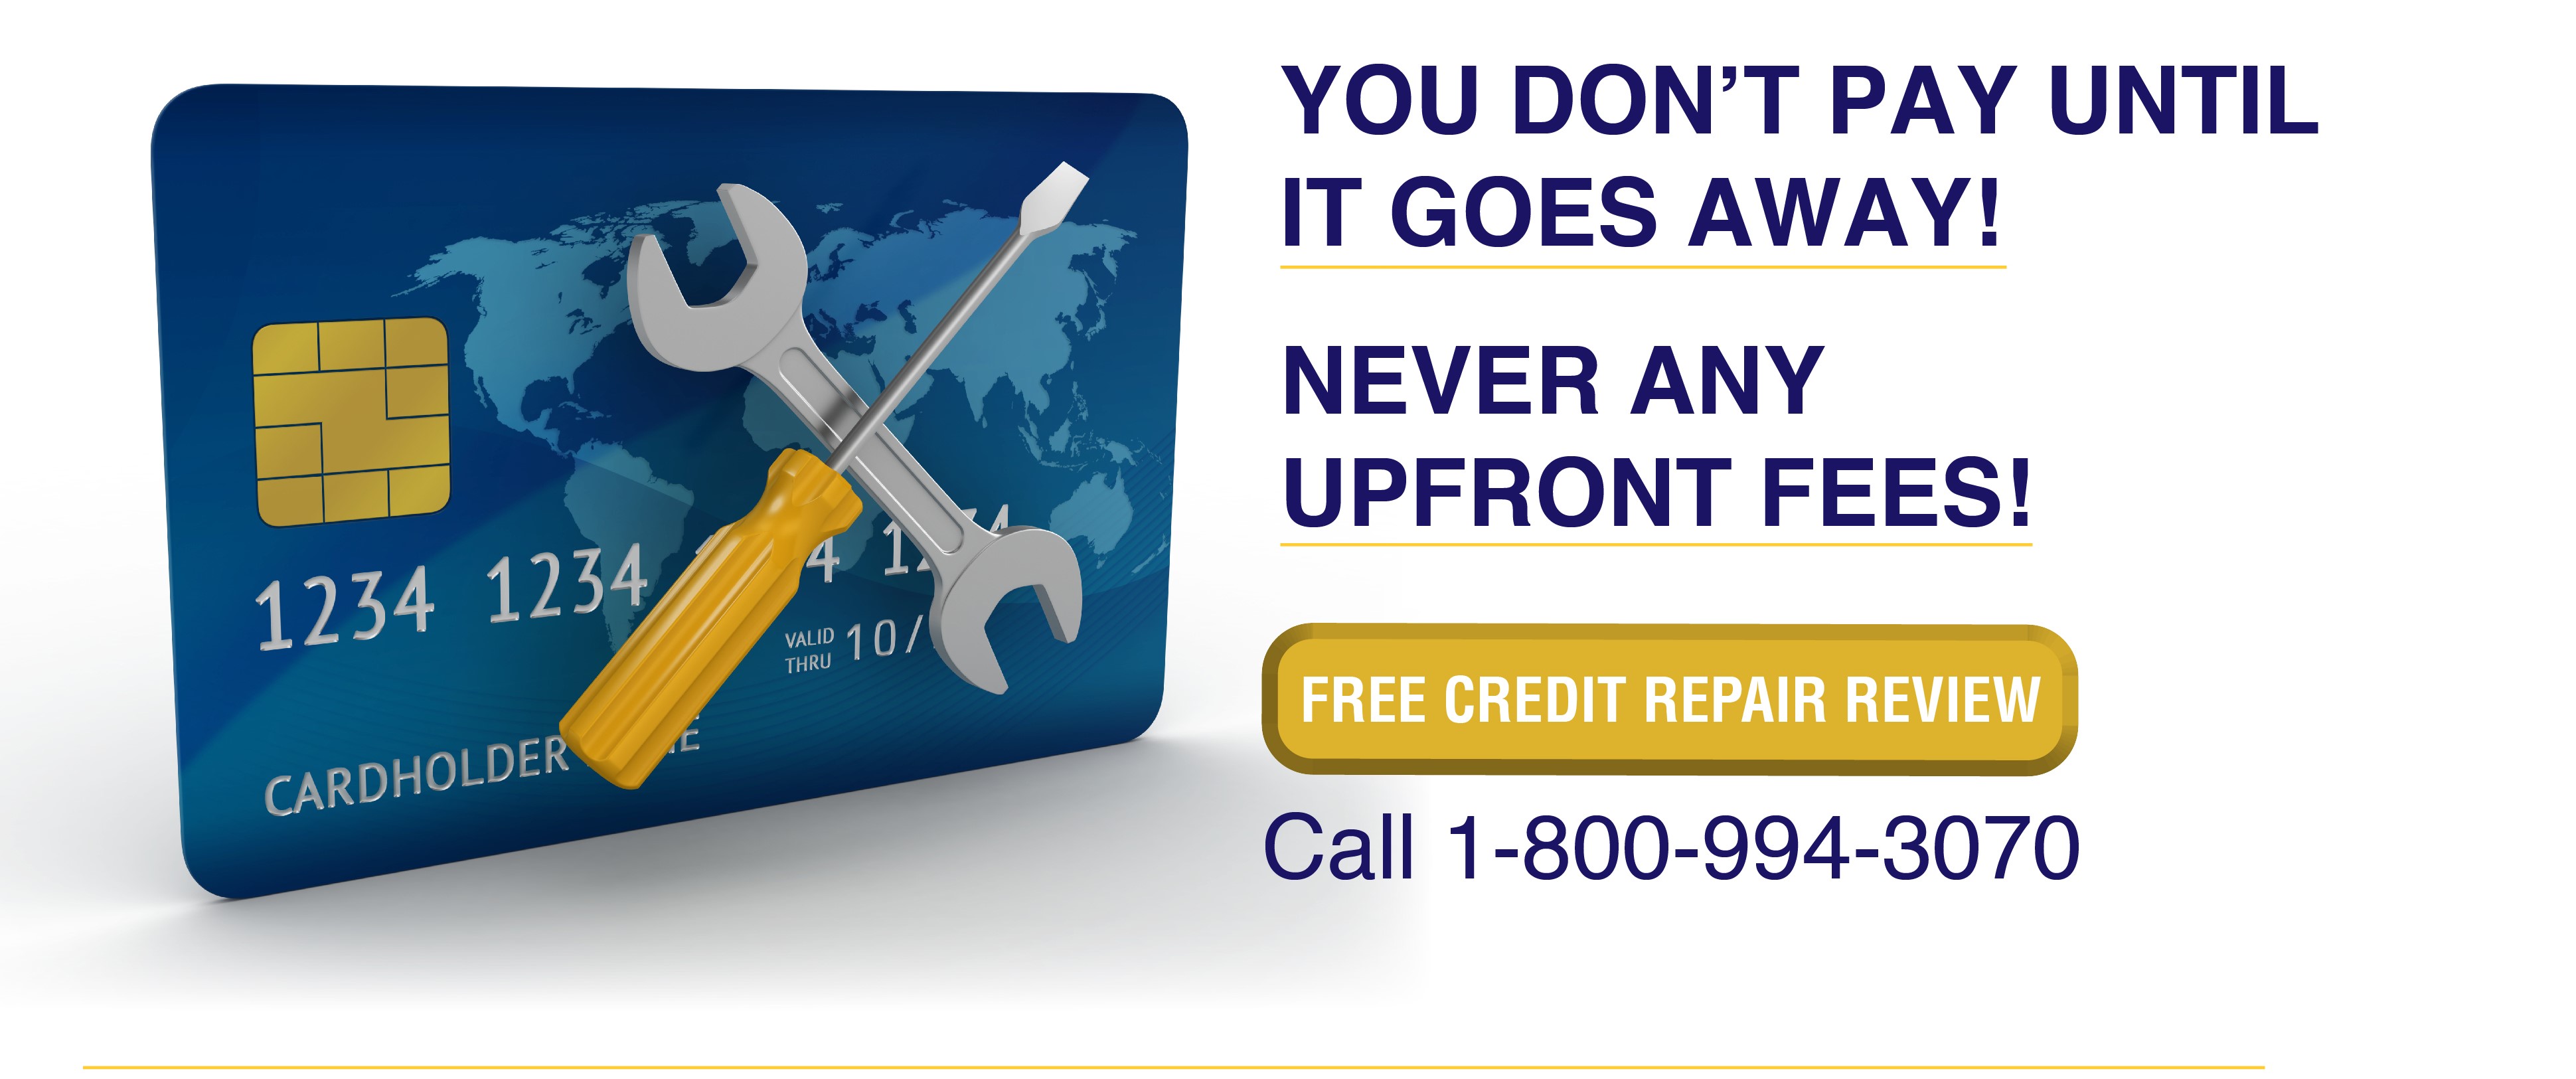 You don't pay until it goes away! Never any upfront fees! Free Credit Repair Review Call 1-800-994-3070